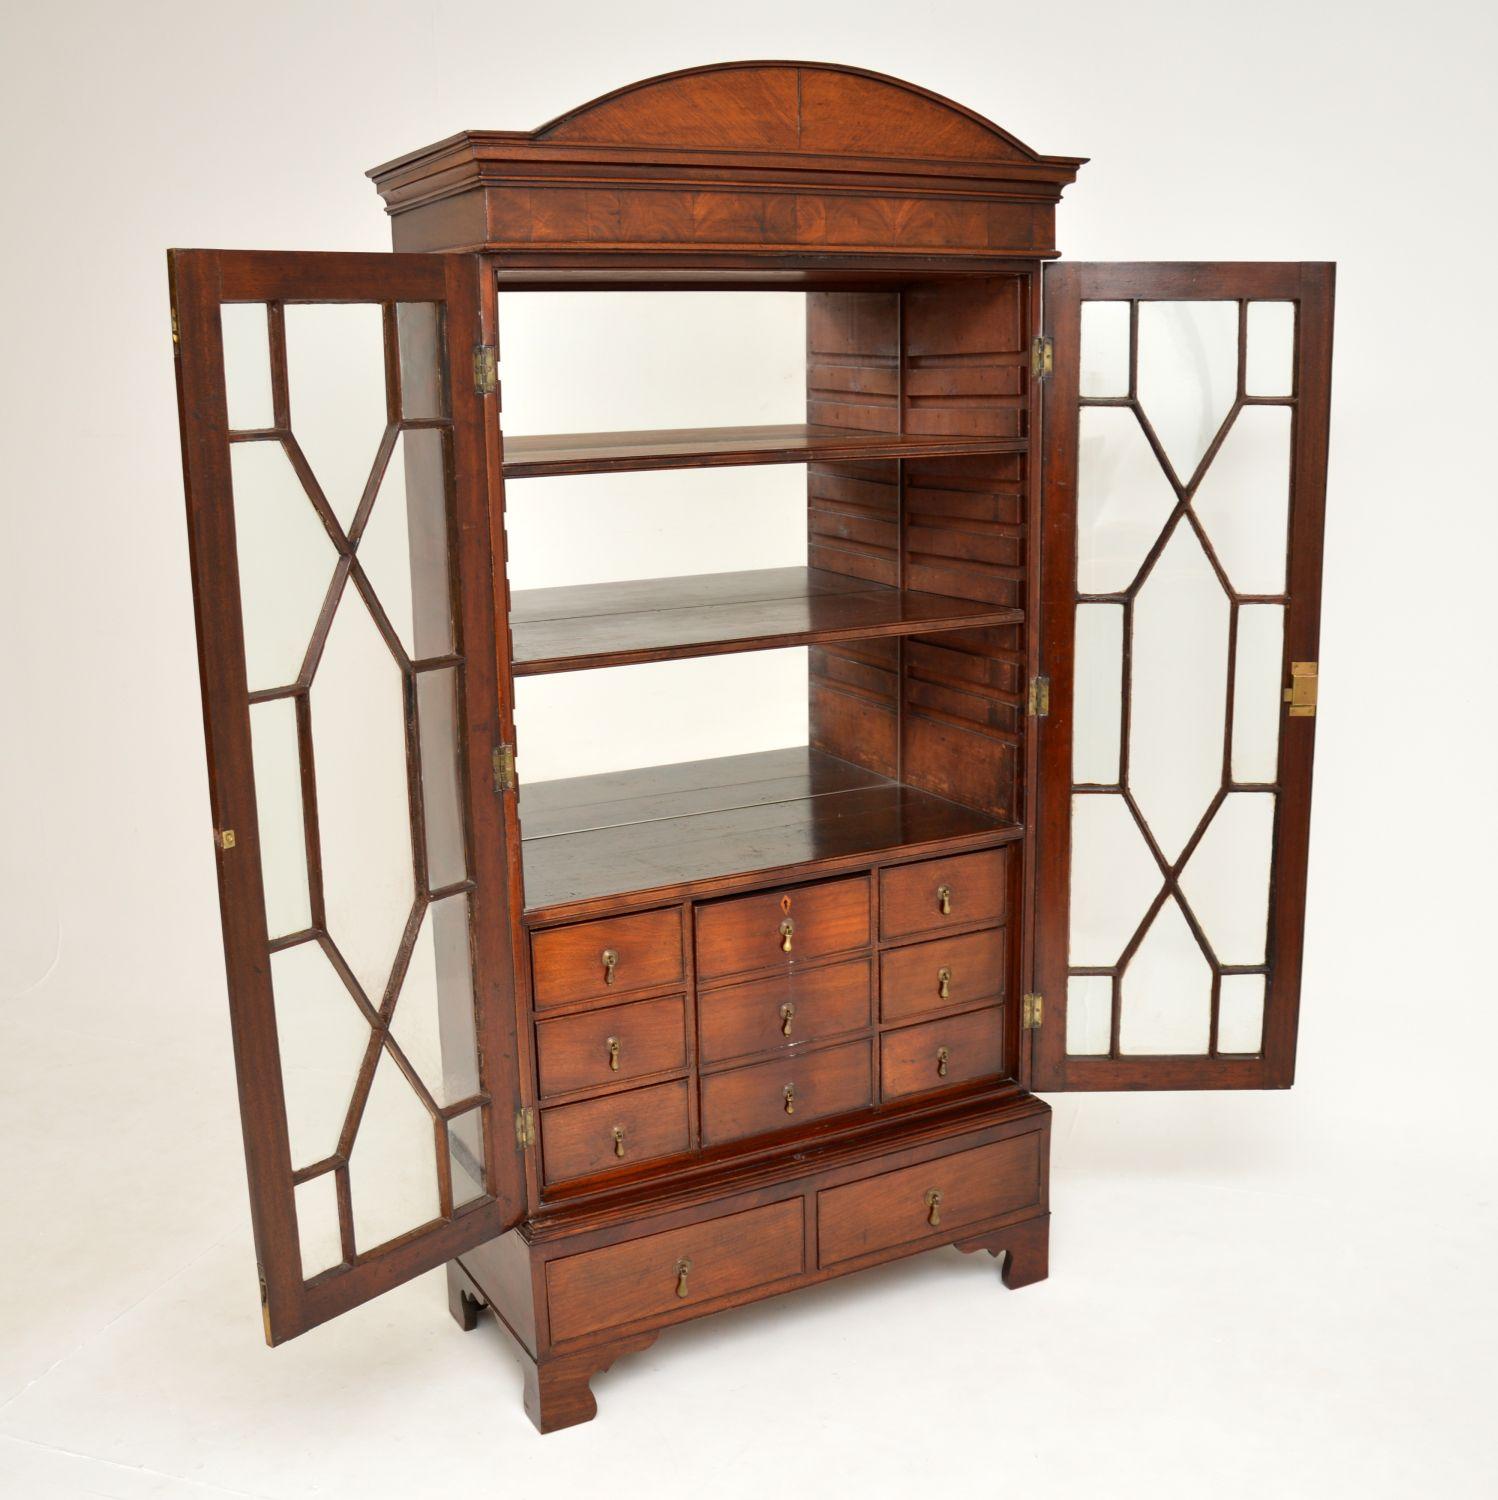 A small proportioned beautiful and unusual antique Georgian bookcase. This was made in England, it dates from around the 1790 period.

It has an interesting and useful design, and is of superb quality. This is of fairly small proportions, the two